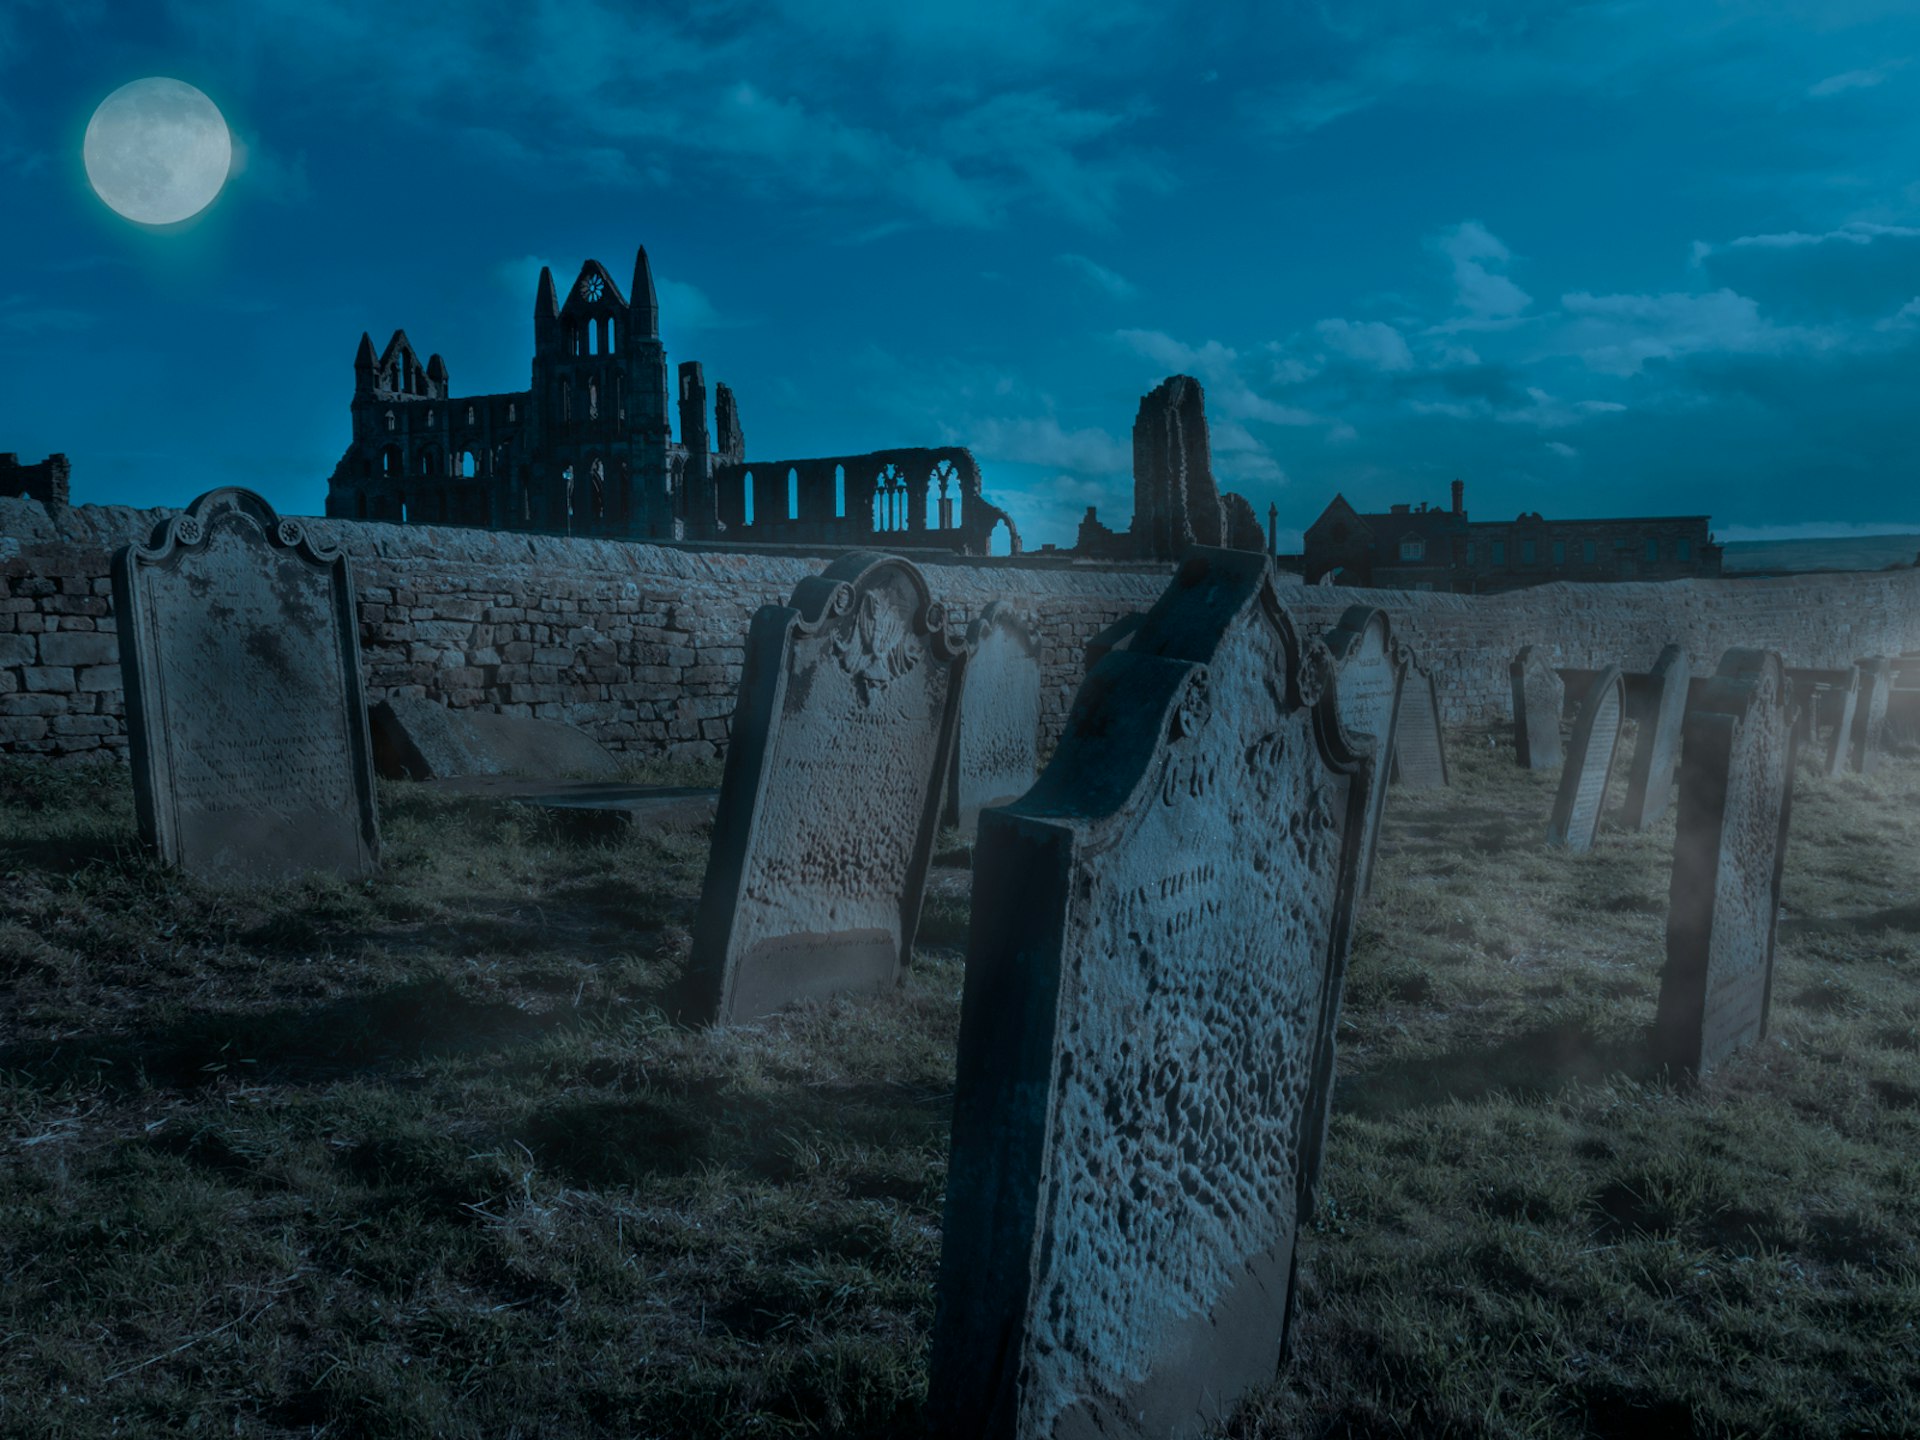 The ruins of Whitby Abbey and the graveyard under a full moon